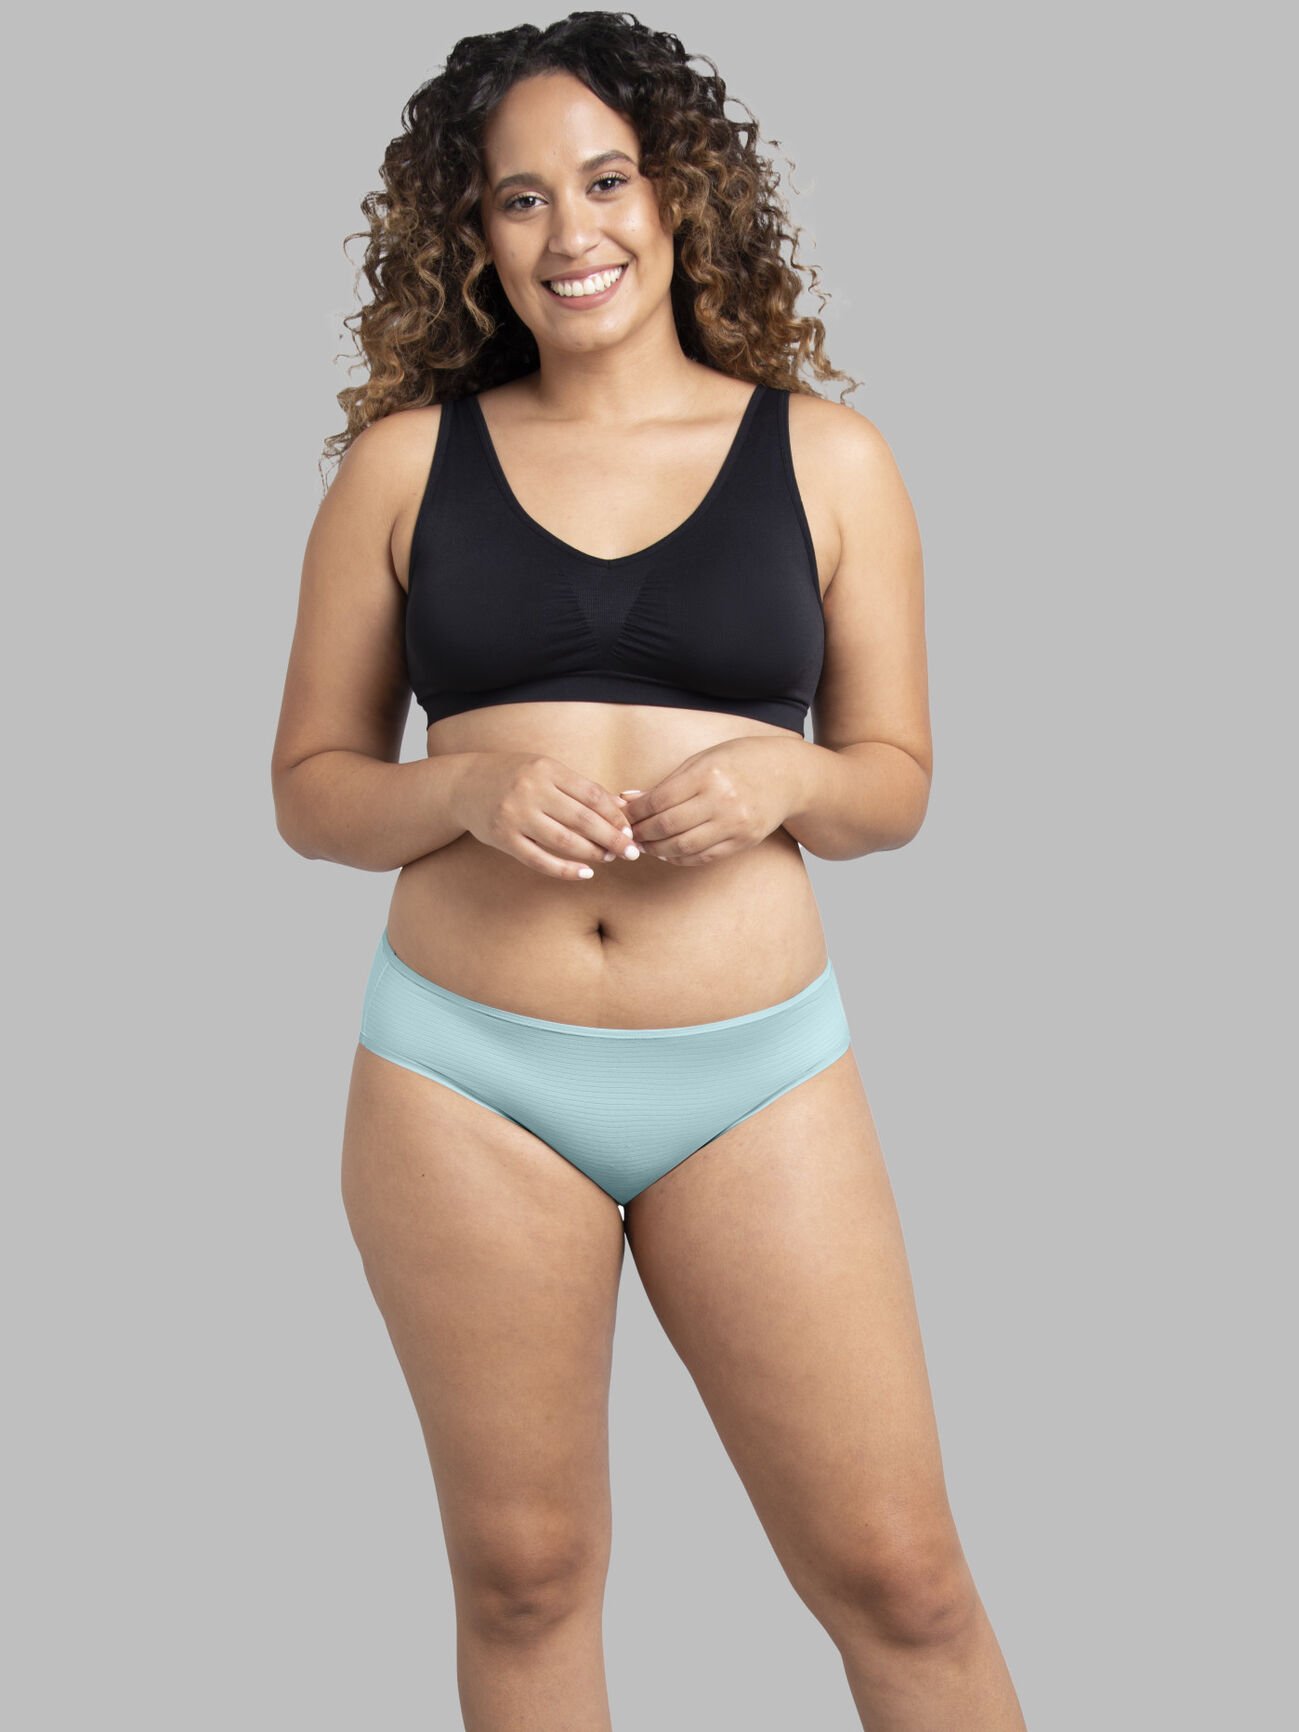 Women's Fruit of the Loom® Signature 3-pack Breathable Seamless